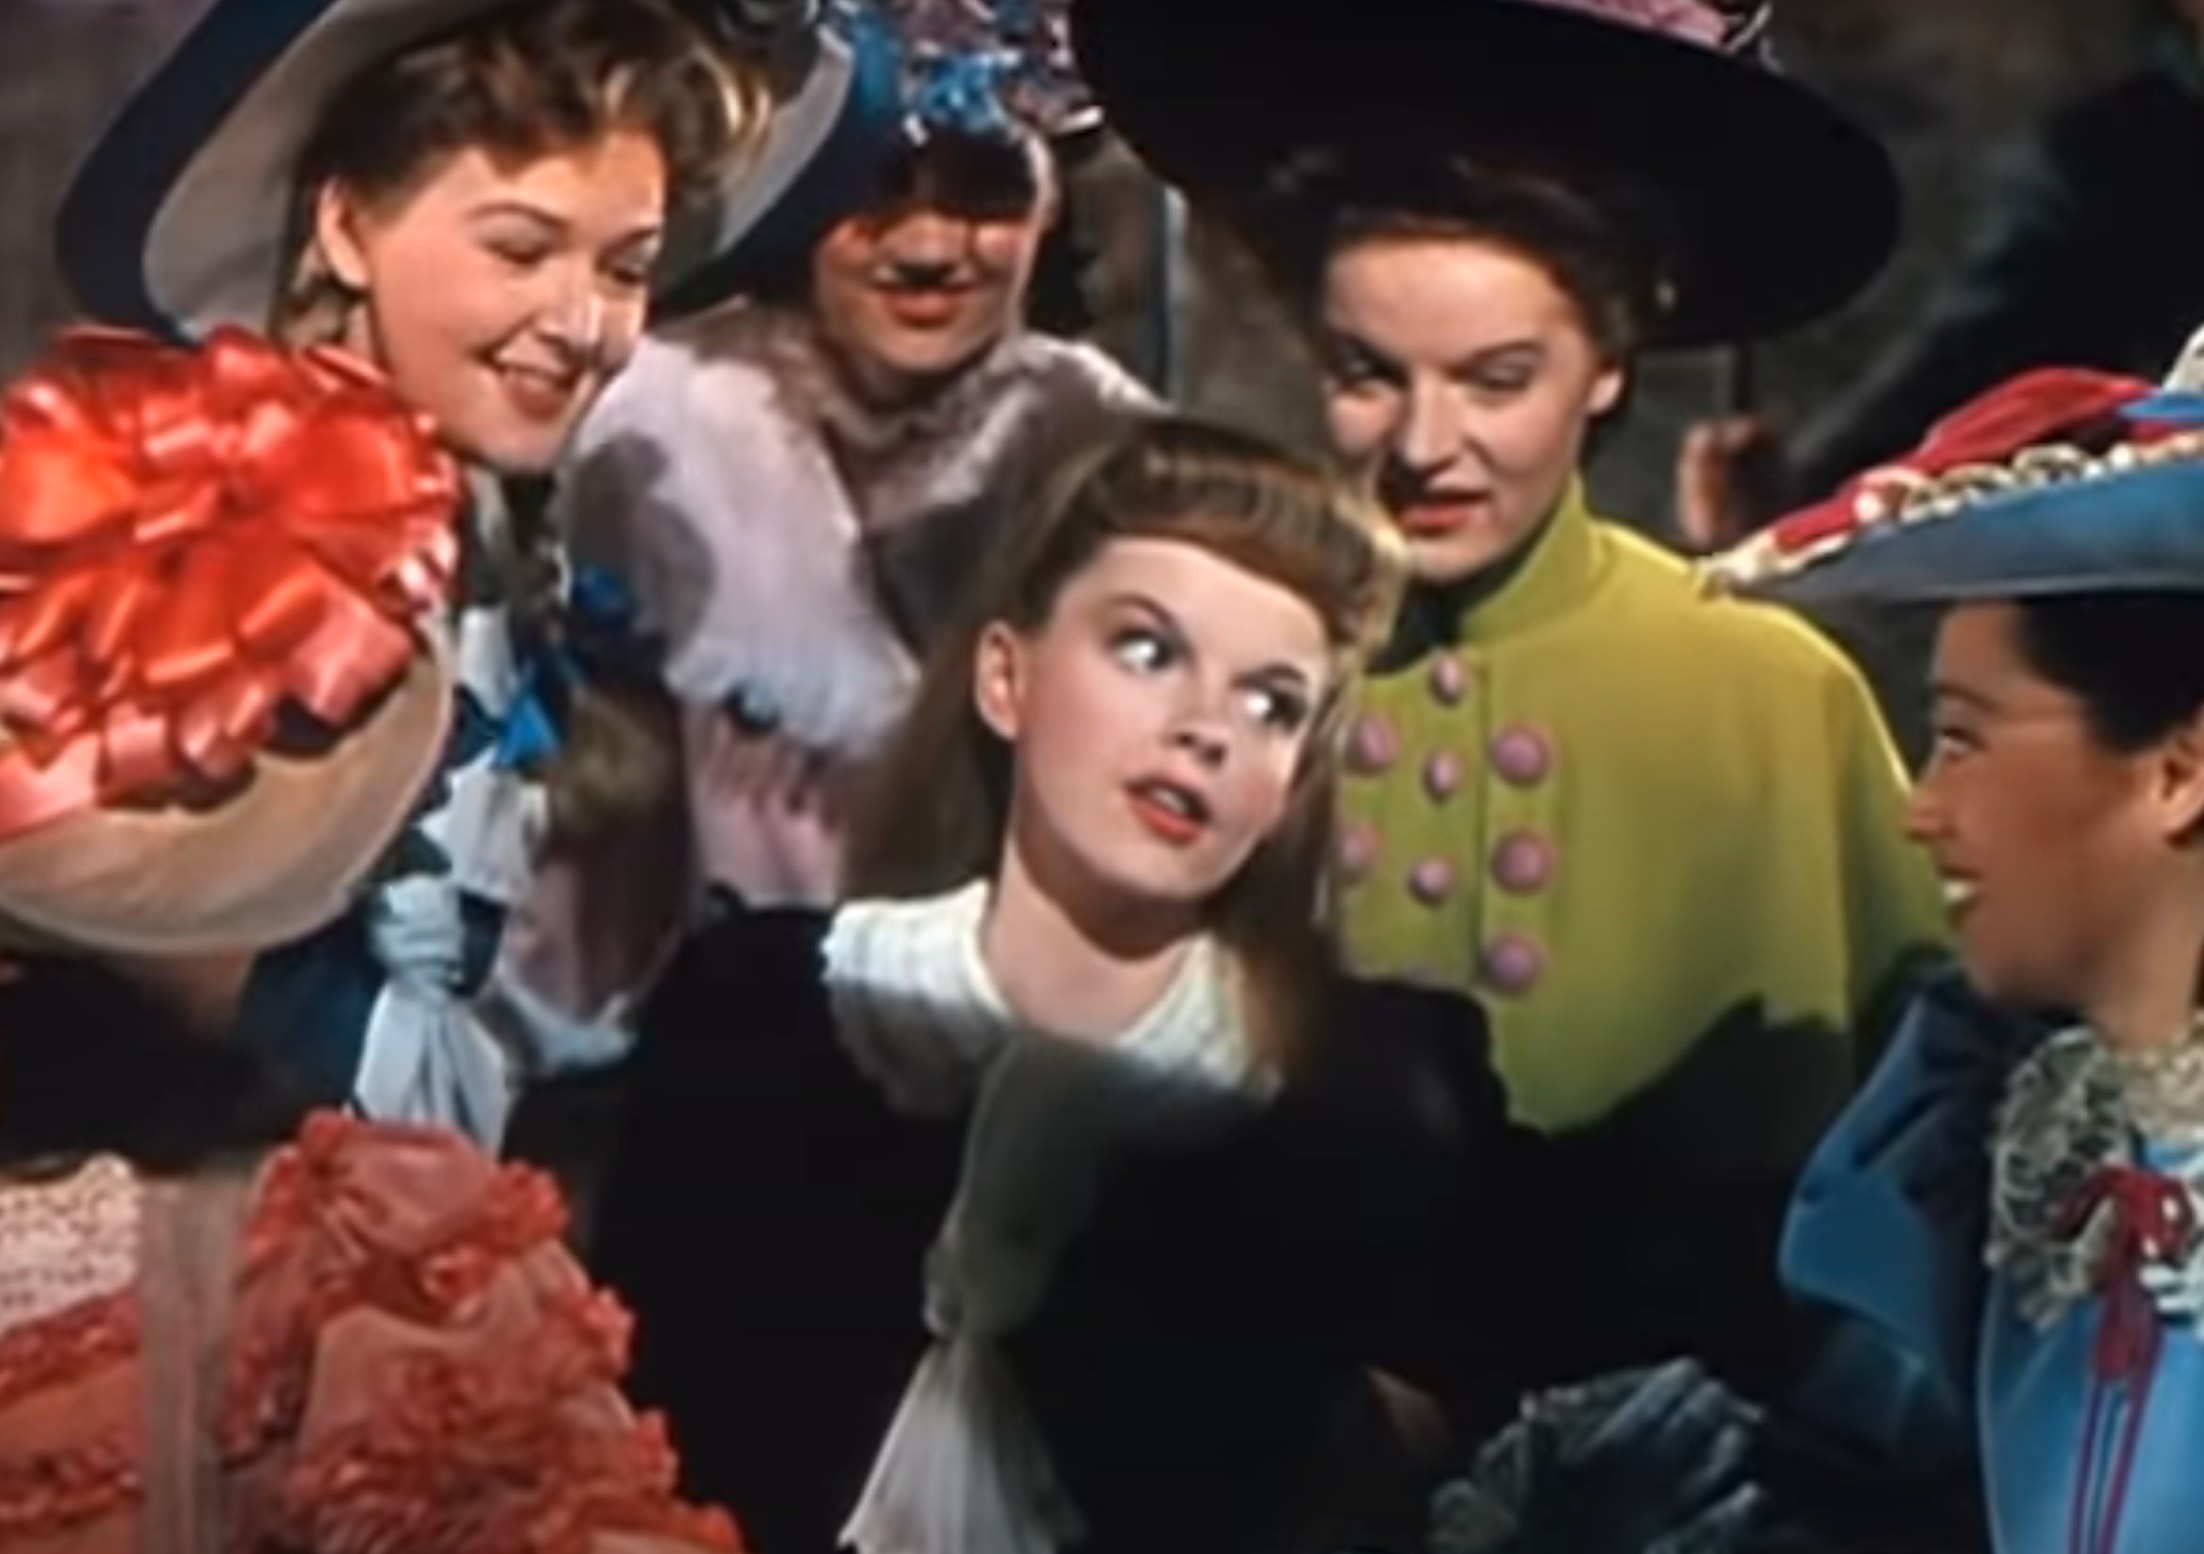 Judy Garland performs in the &quot;Meet Me in St. Louis&quot; trailer